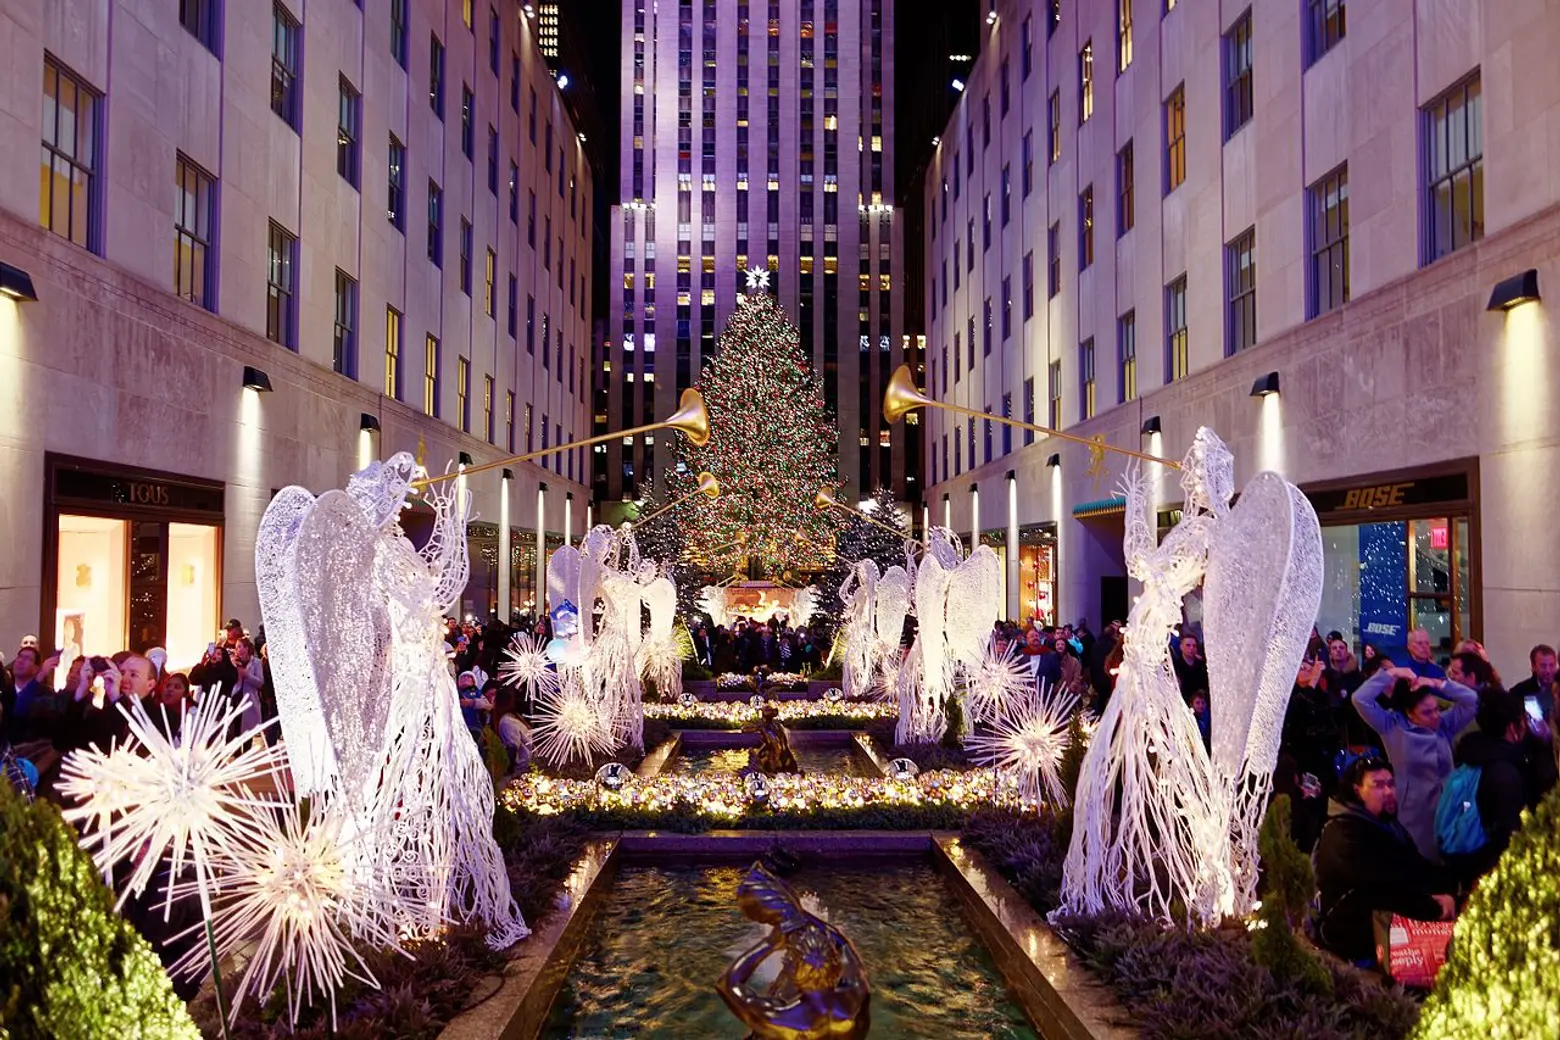 Rockefeller tree lighting 2020: When it starts and how to watch